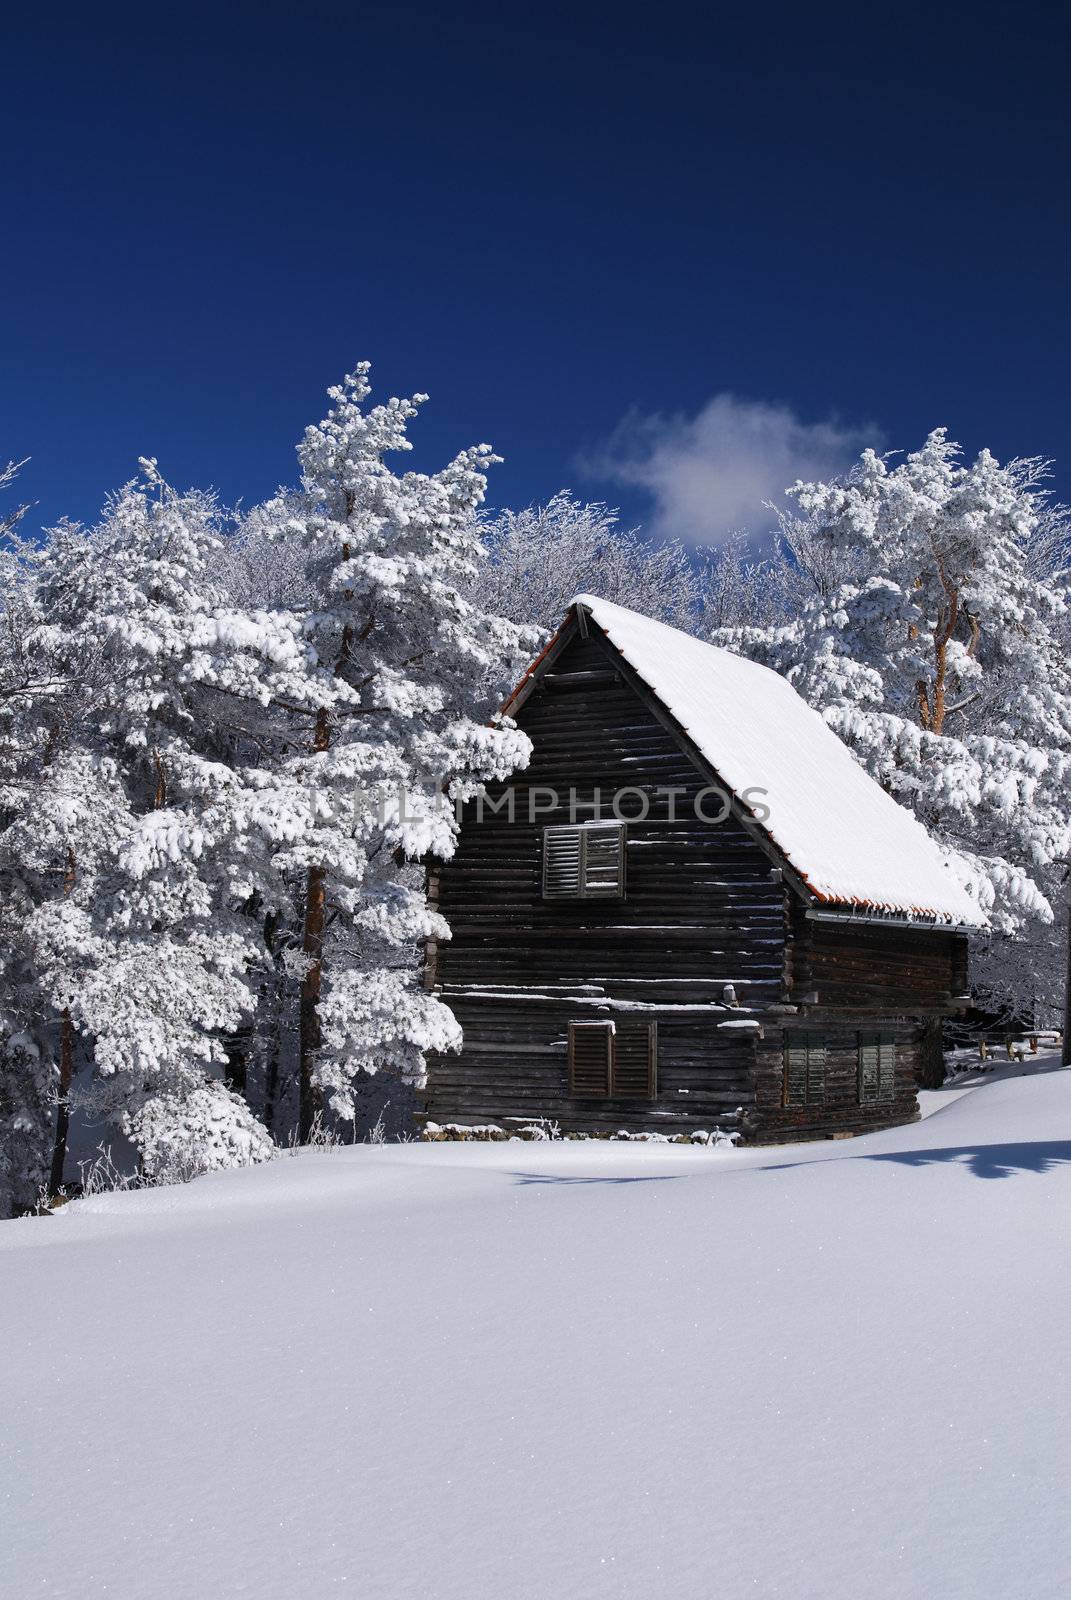 Mountain house in snow, winter sunny day